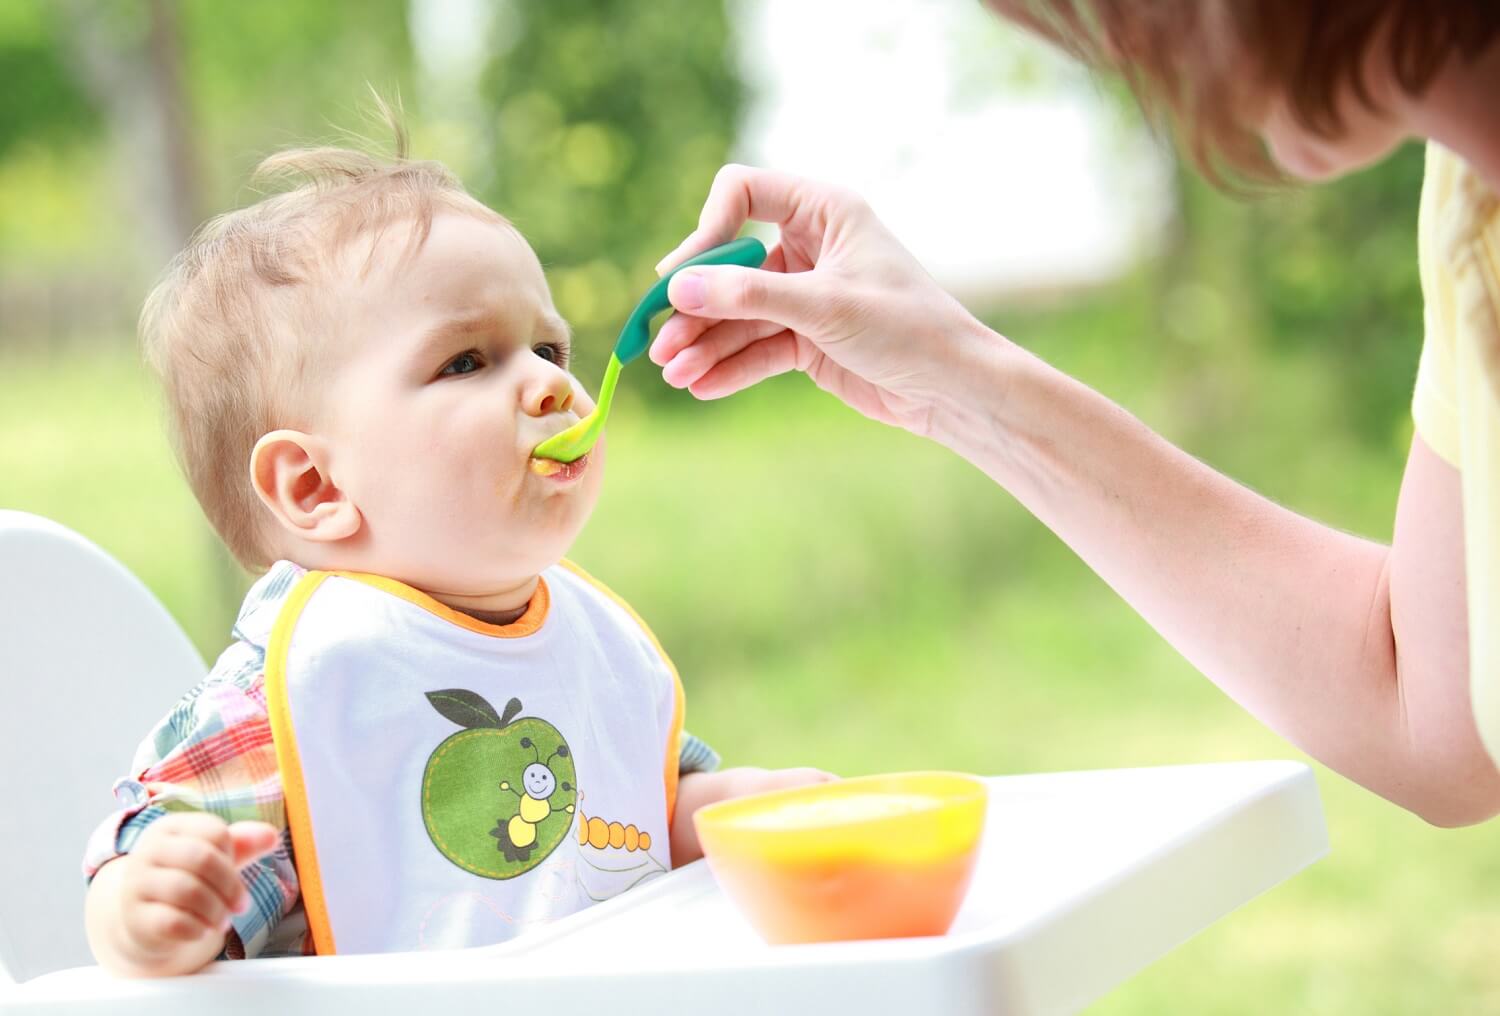 feeding a complimentary diet to a baby